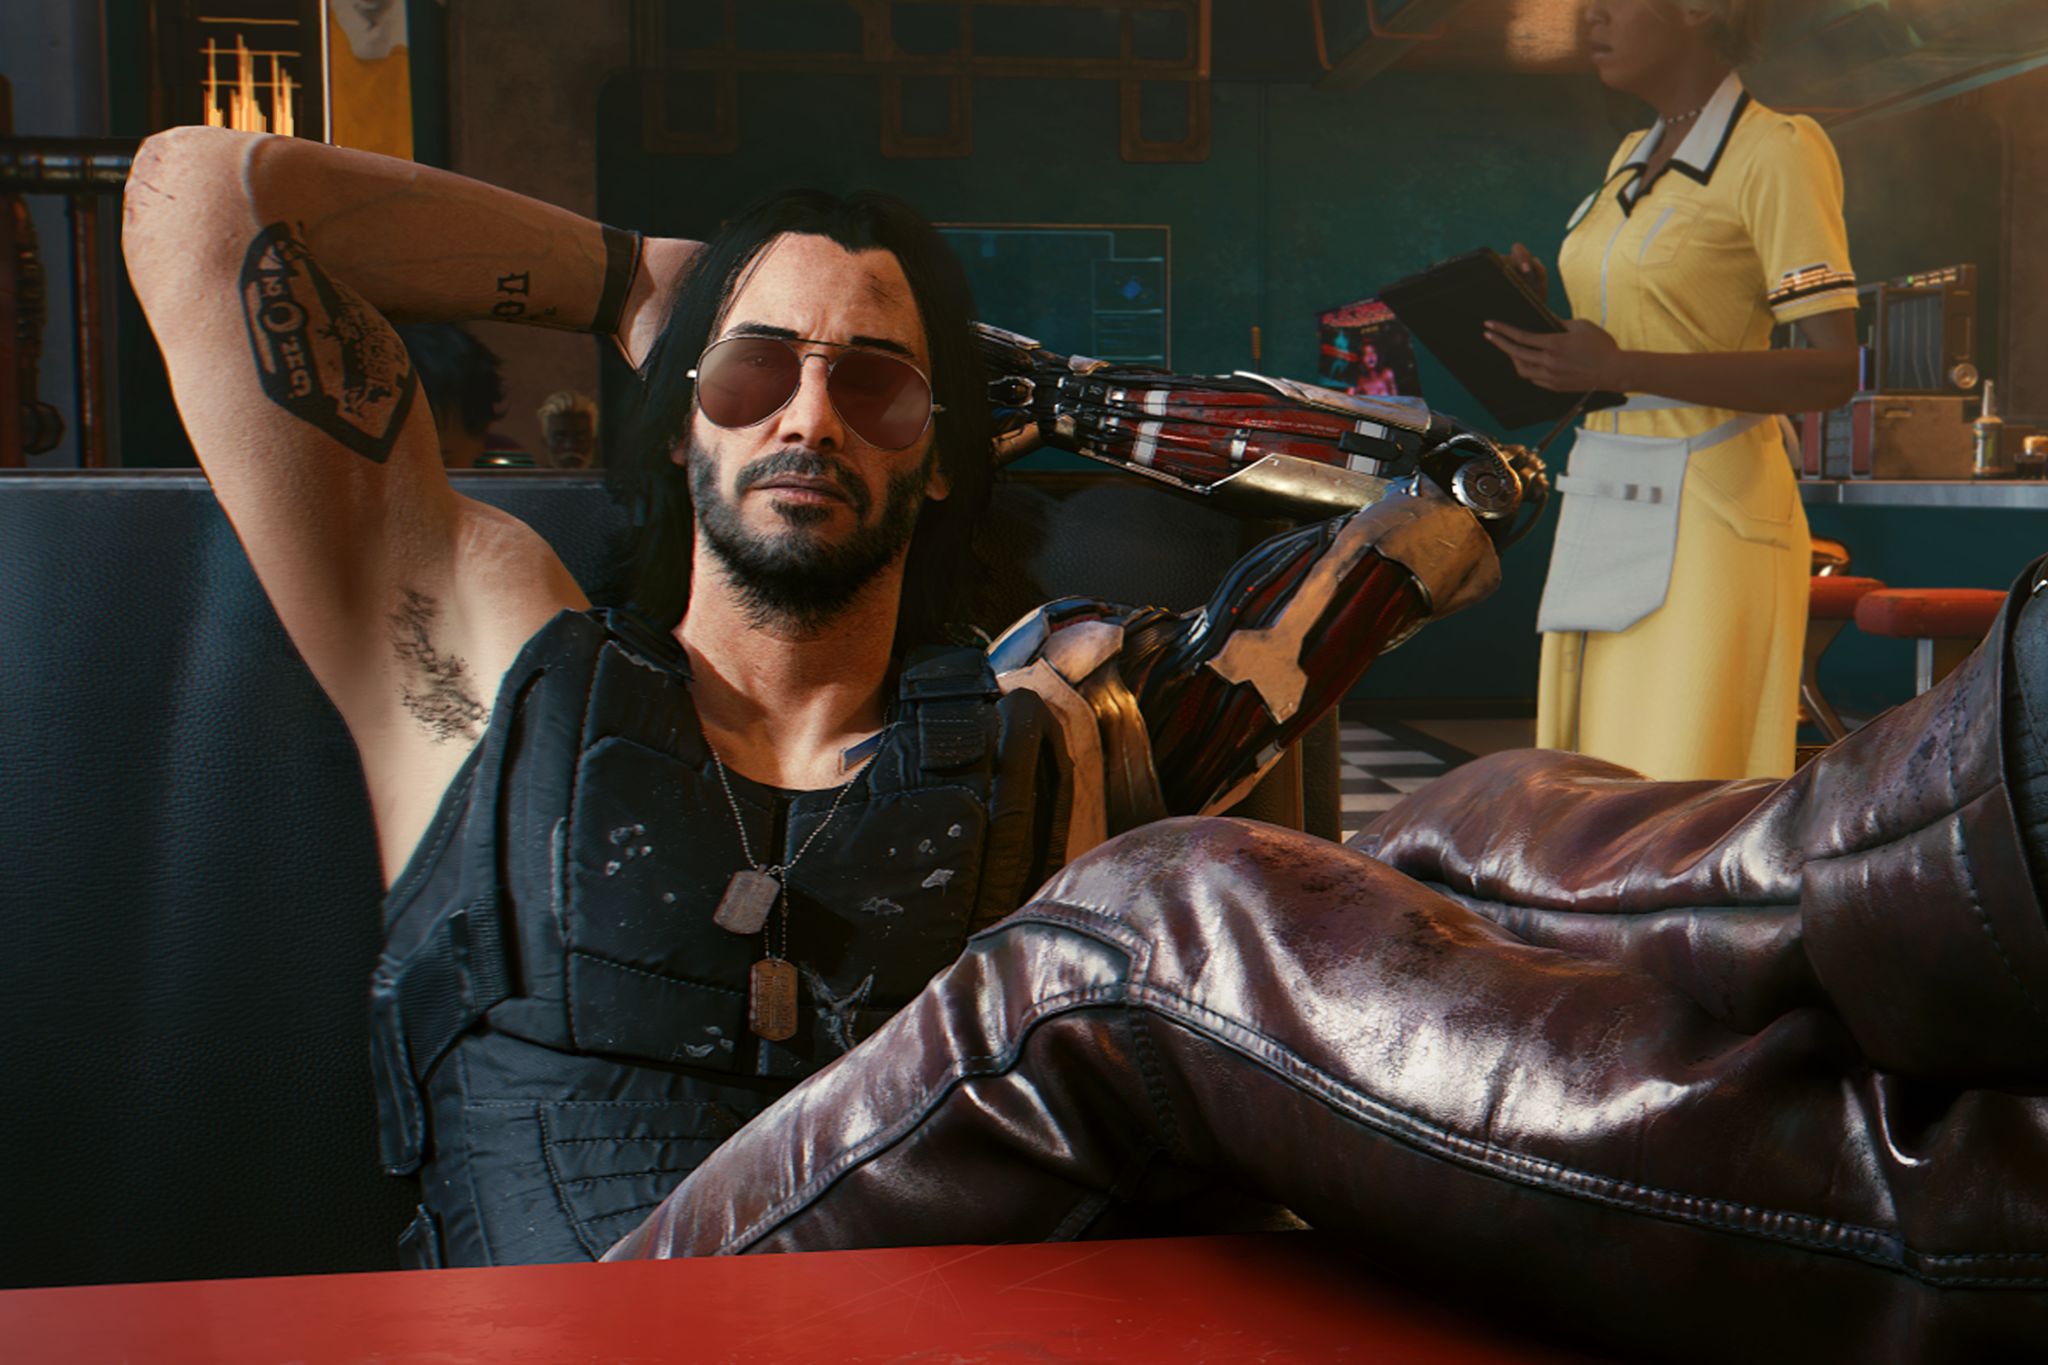 ‘Acting for video games is acting, pure and simple’: Keanu Reeves as Johnny Silverhand in the 2021 video game ‘Cyberpunk 2077’